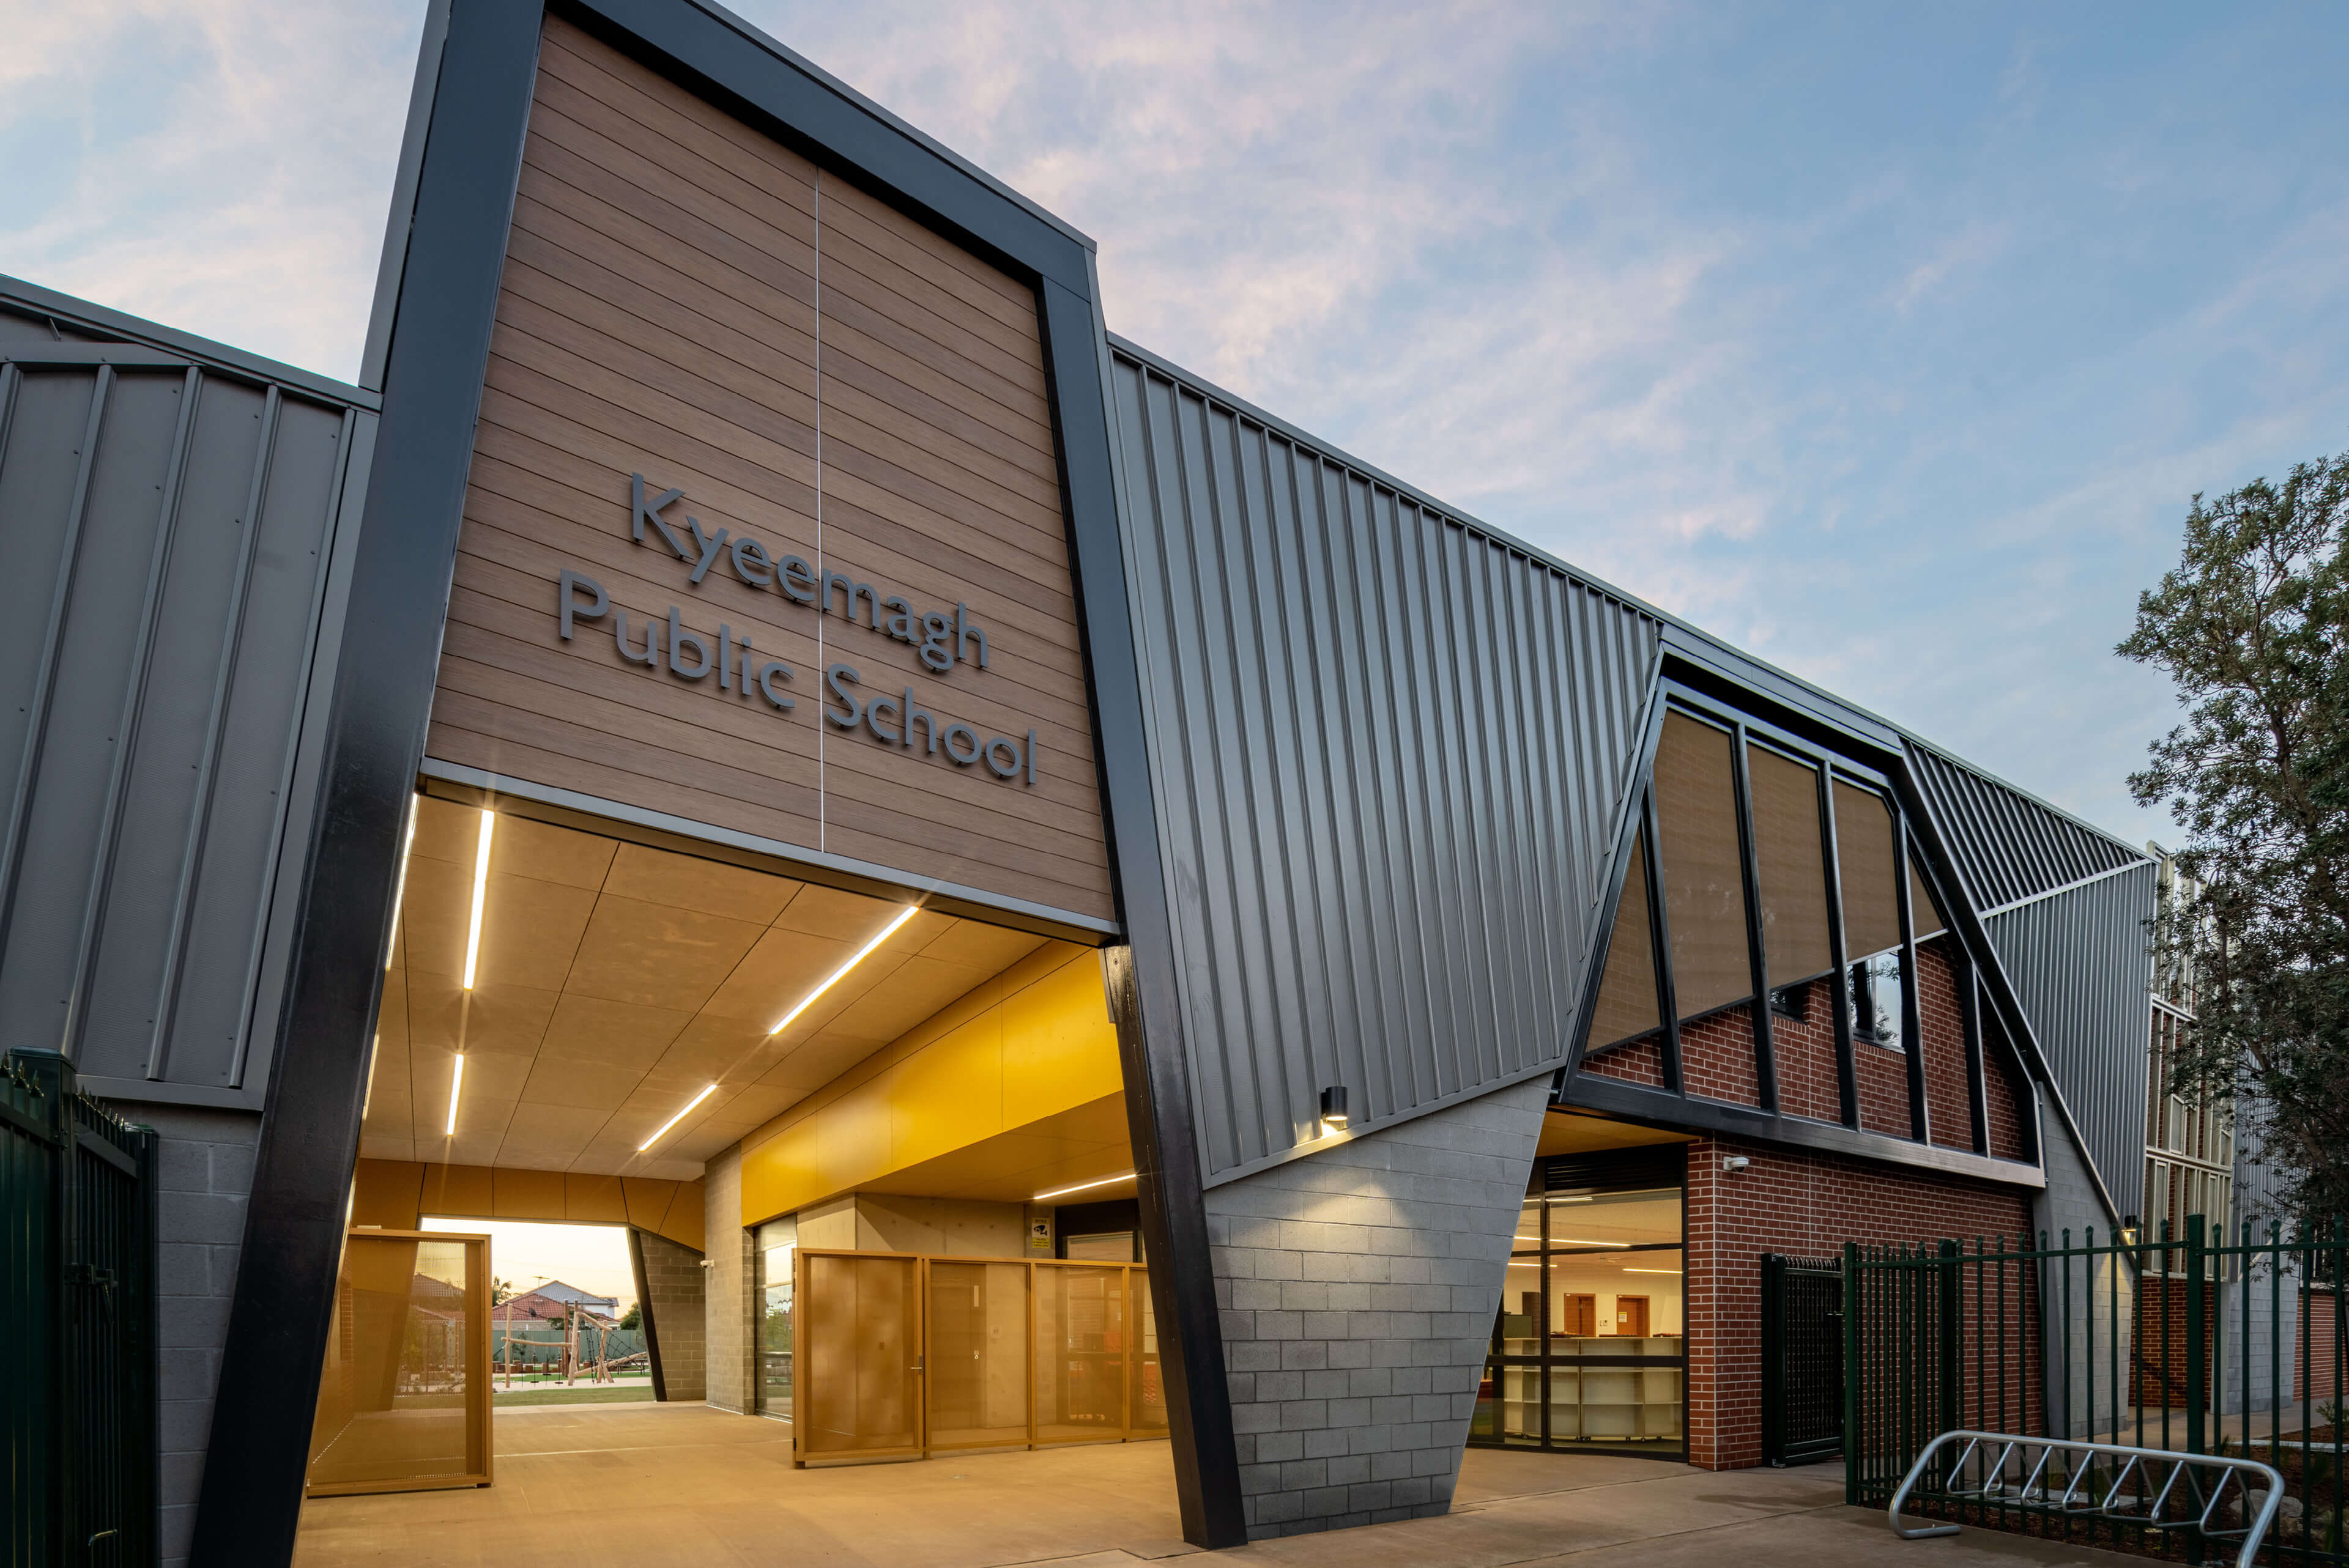 1 front entrance cathedral style at kyeemagh public school taylor construction education